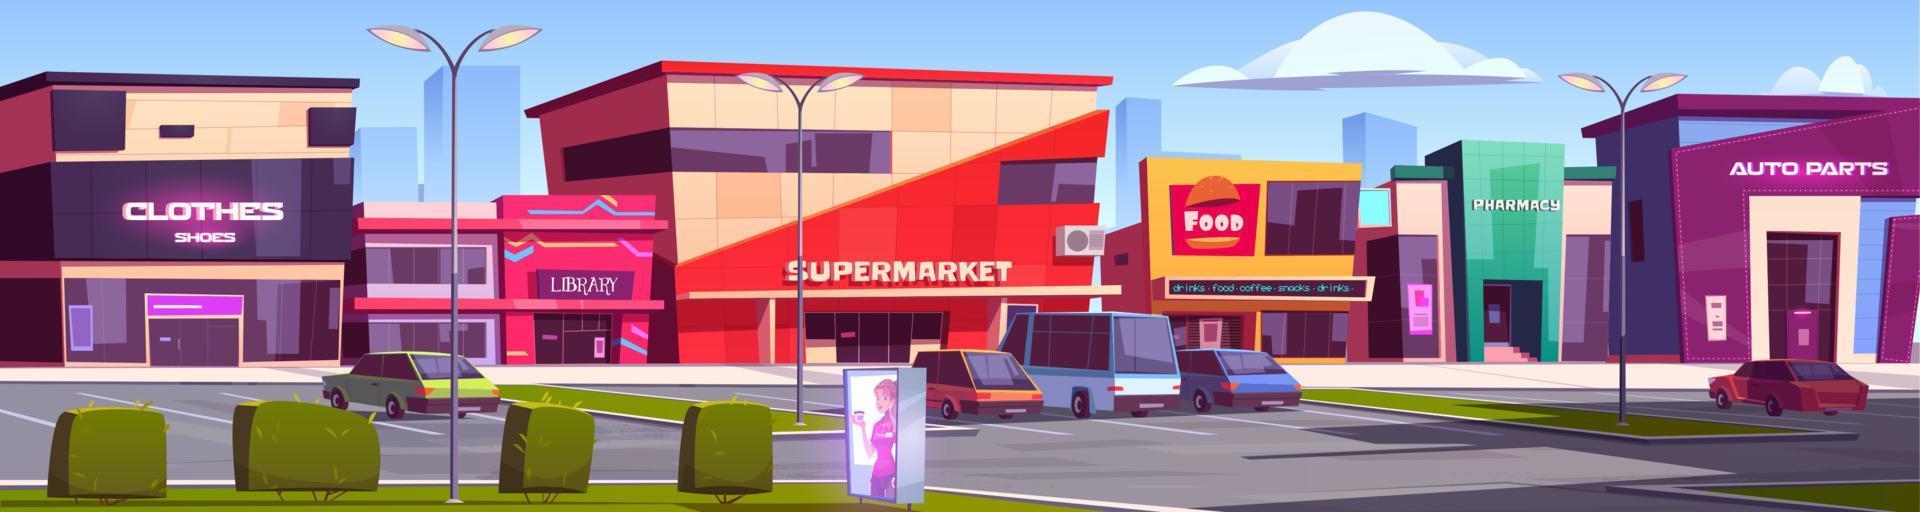 Store buildings, shopping area with parking area vector